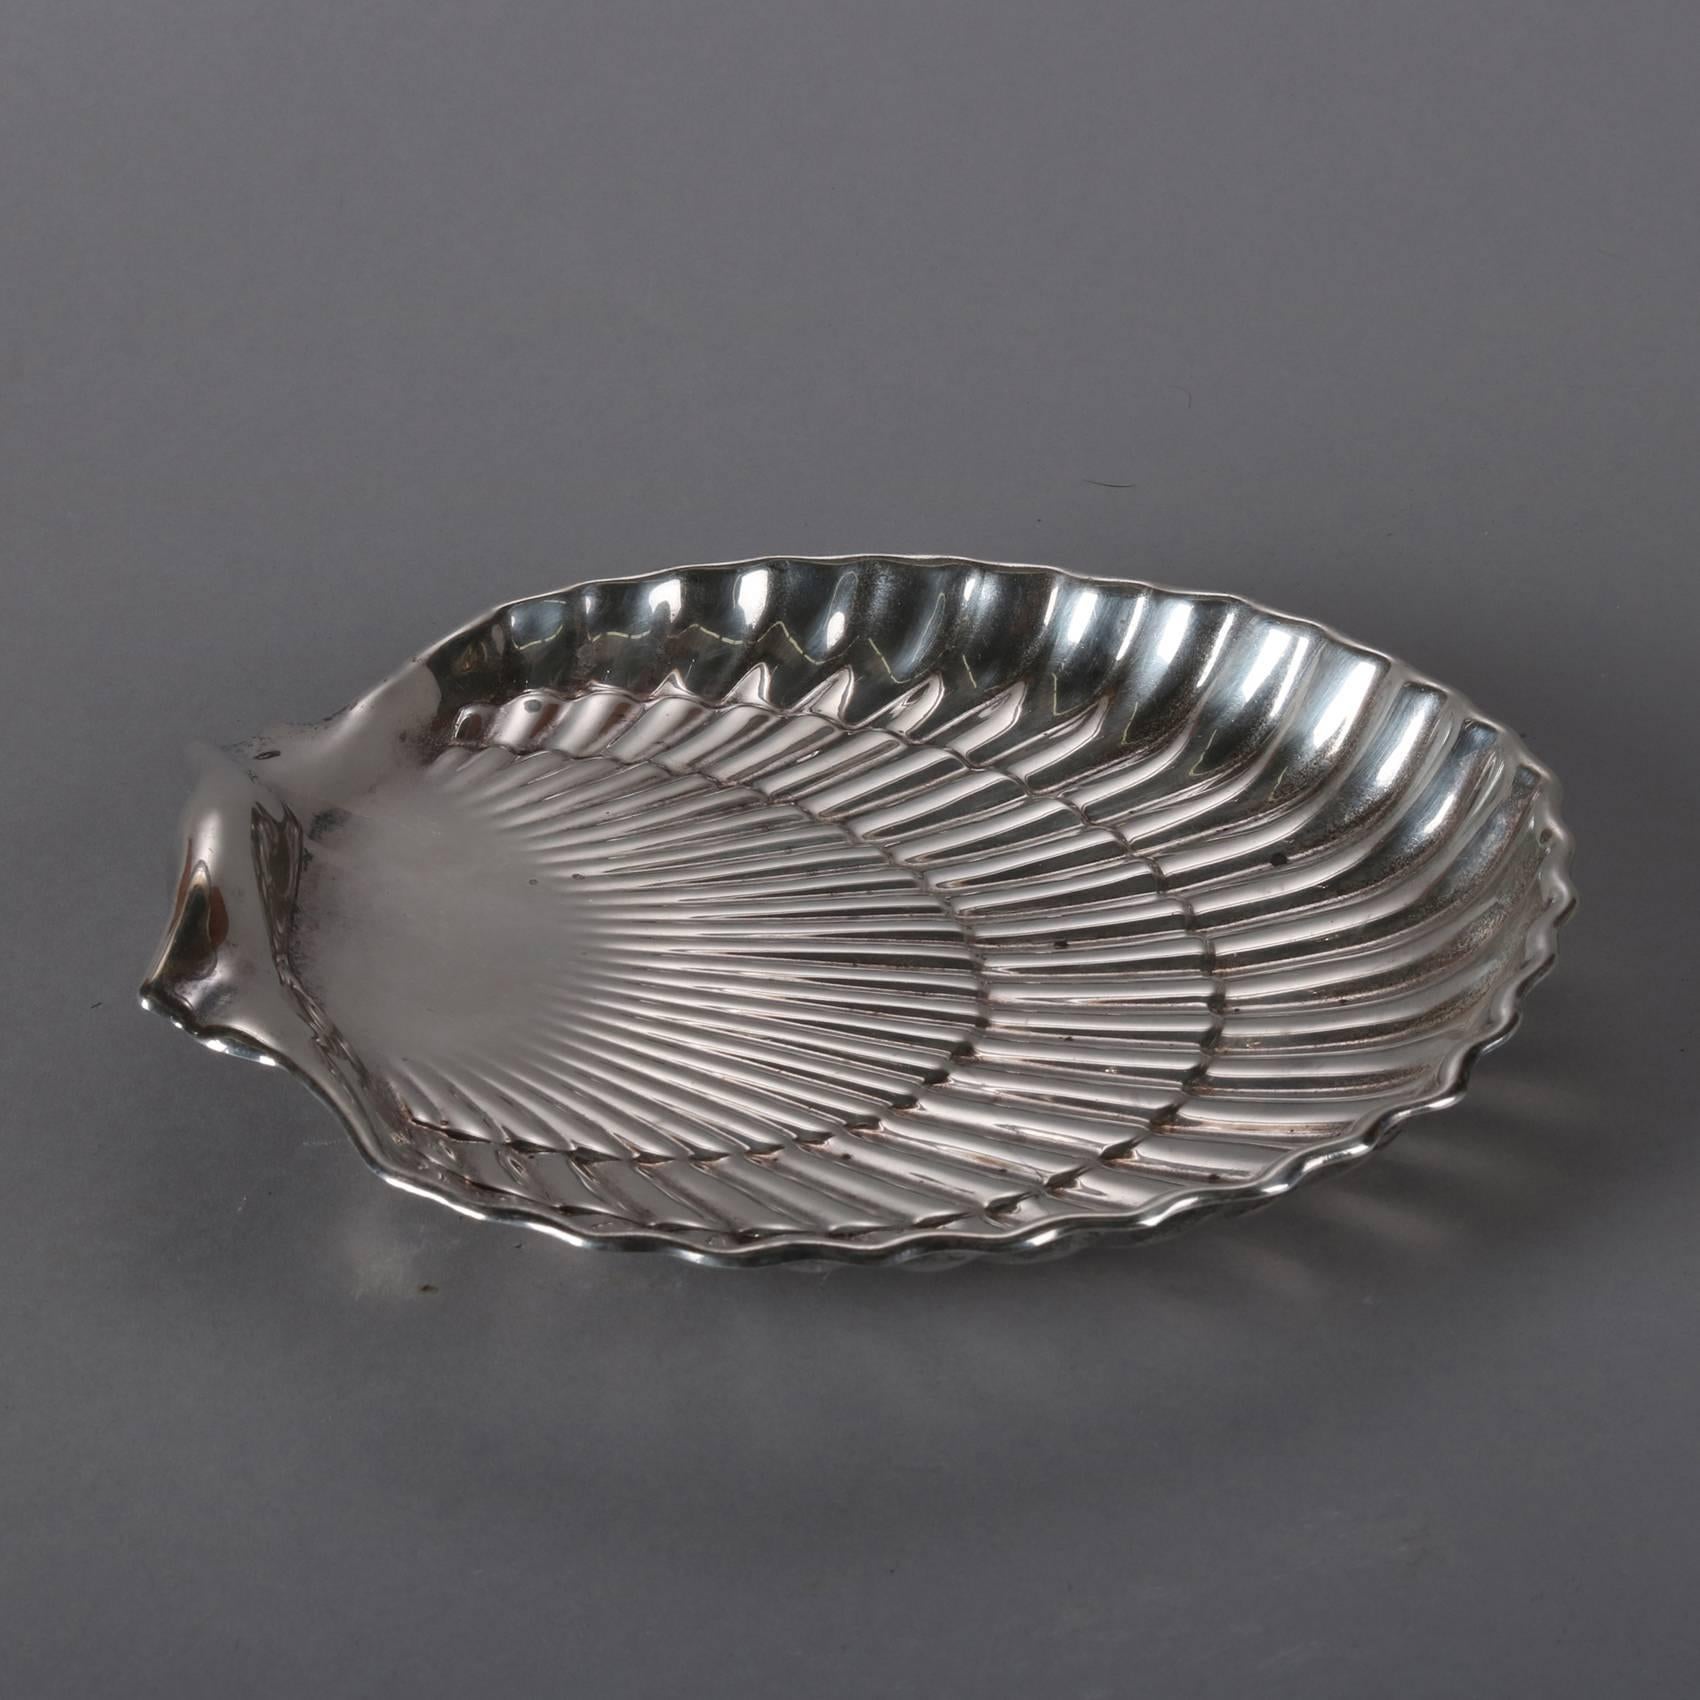 Antique sterling silver dresser tray by Gorham Silver features scallop shell form bowl and is seated on ball feet, hallmarked on base, 15 toz, 20th century

Measures: 1.5